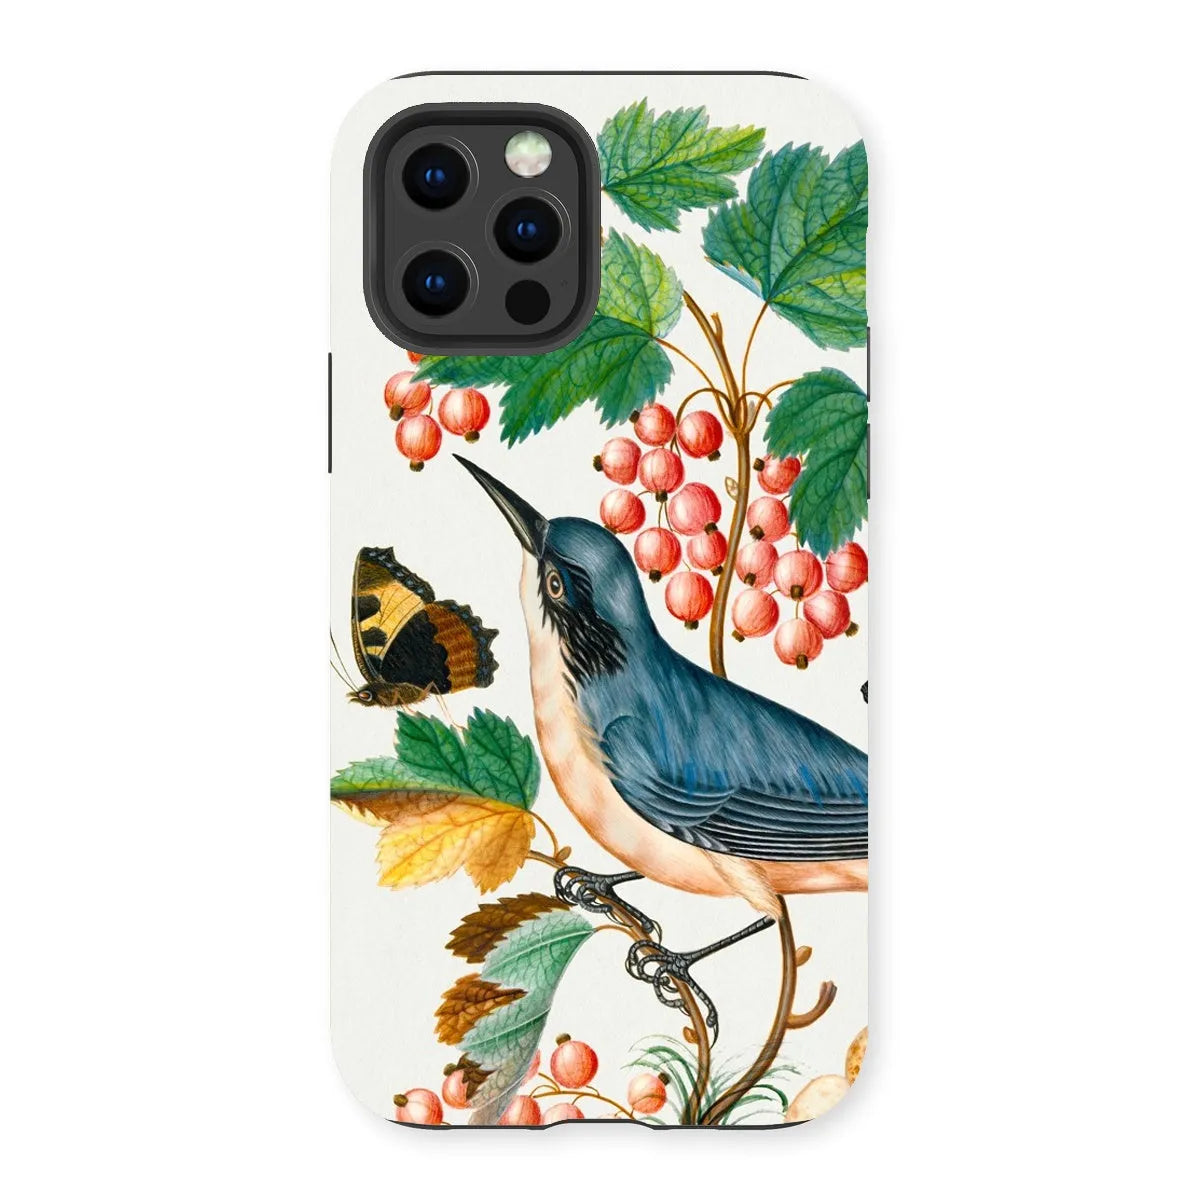 Warbler Admiral Wasps & Ants - Art Phone Case - James Bolton - Iphone 13 Pro / Matte - Mobile Phone Cases - Aesthetic